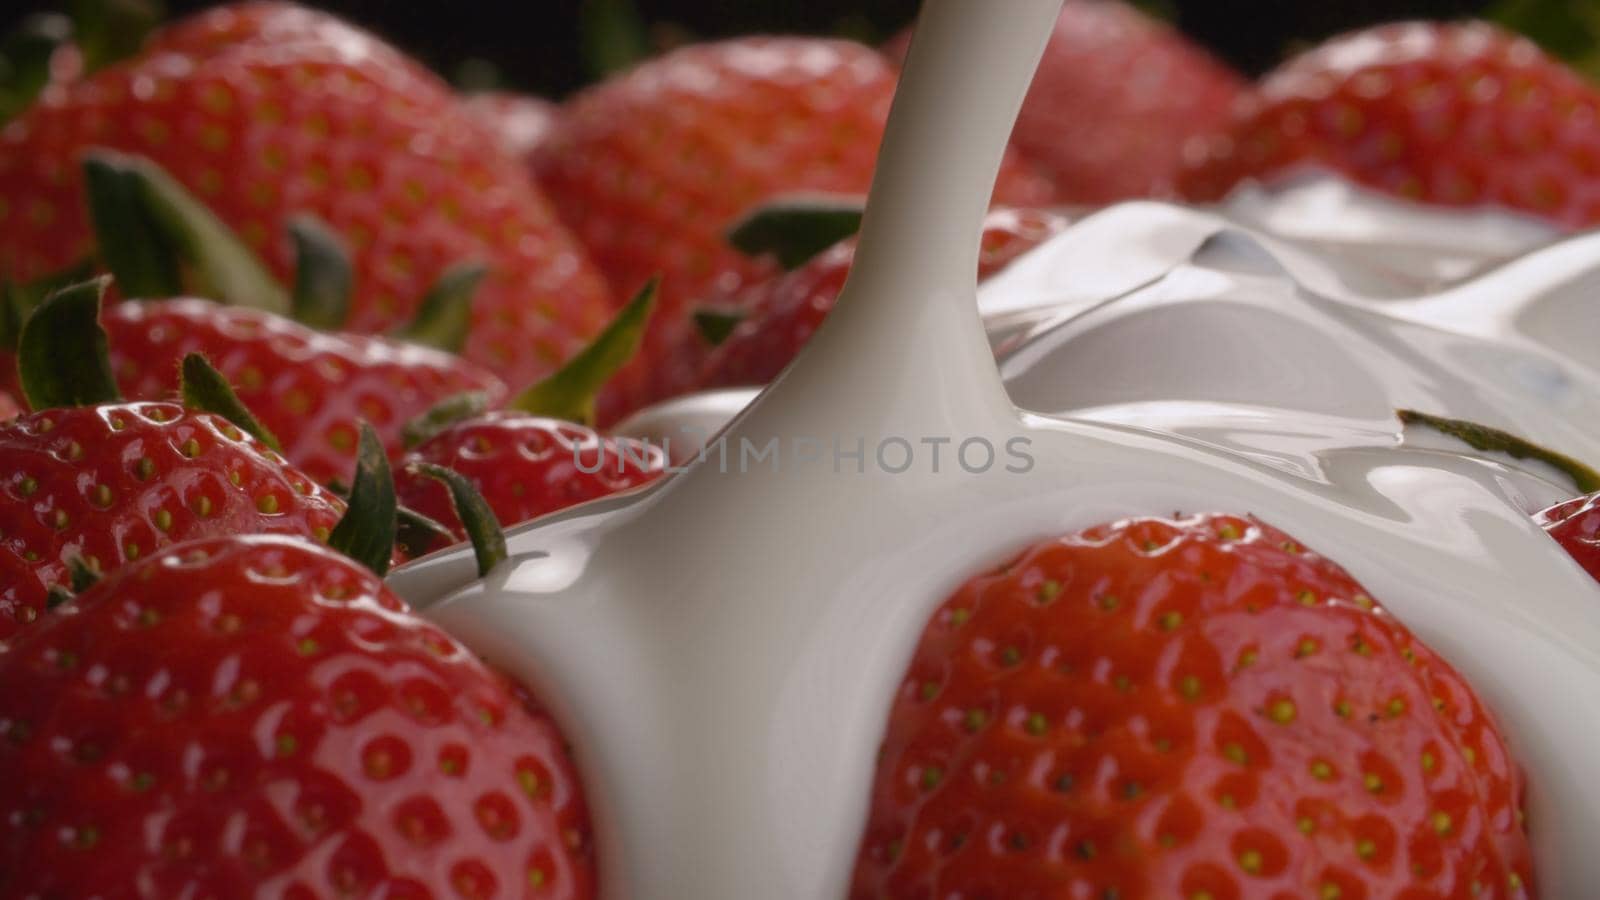 Extreme close up yogurt pouring onto strawberries on black background. Healthy fresh food concept